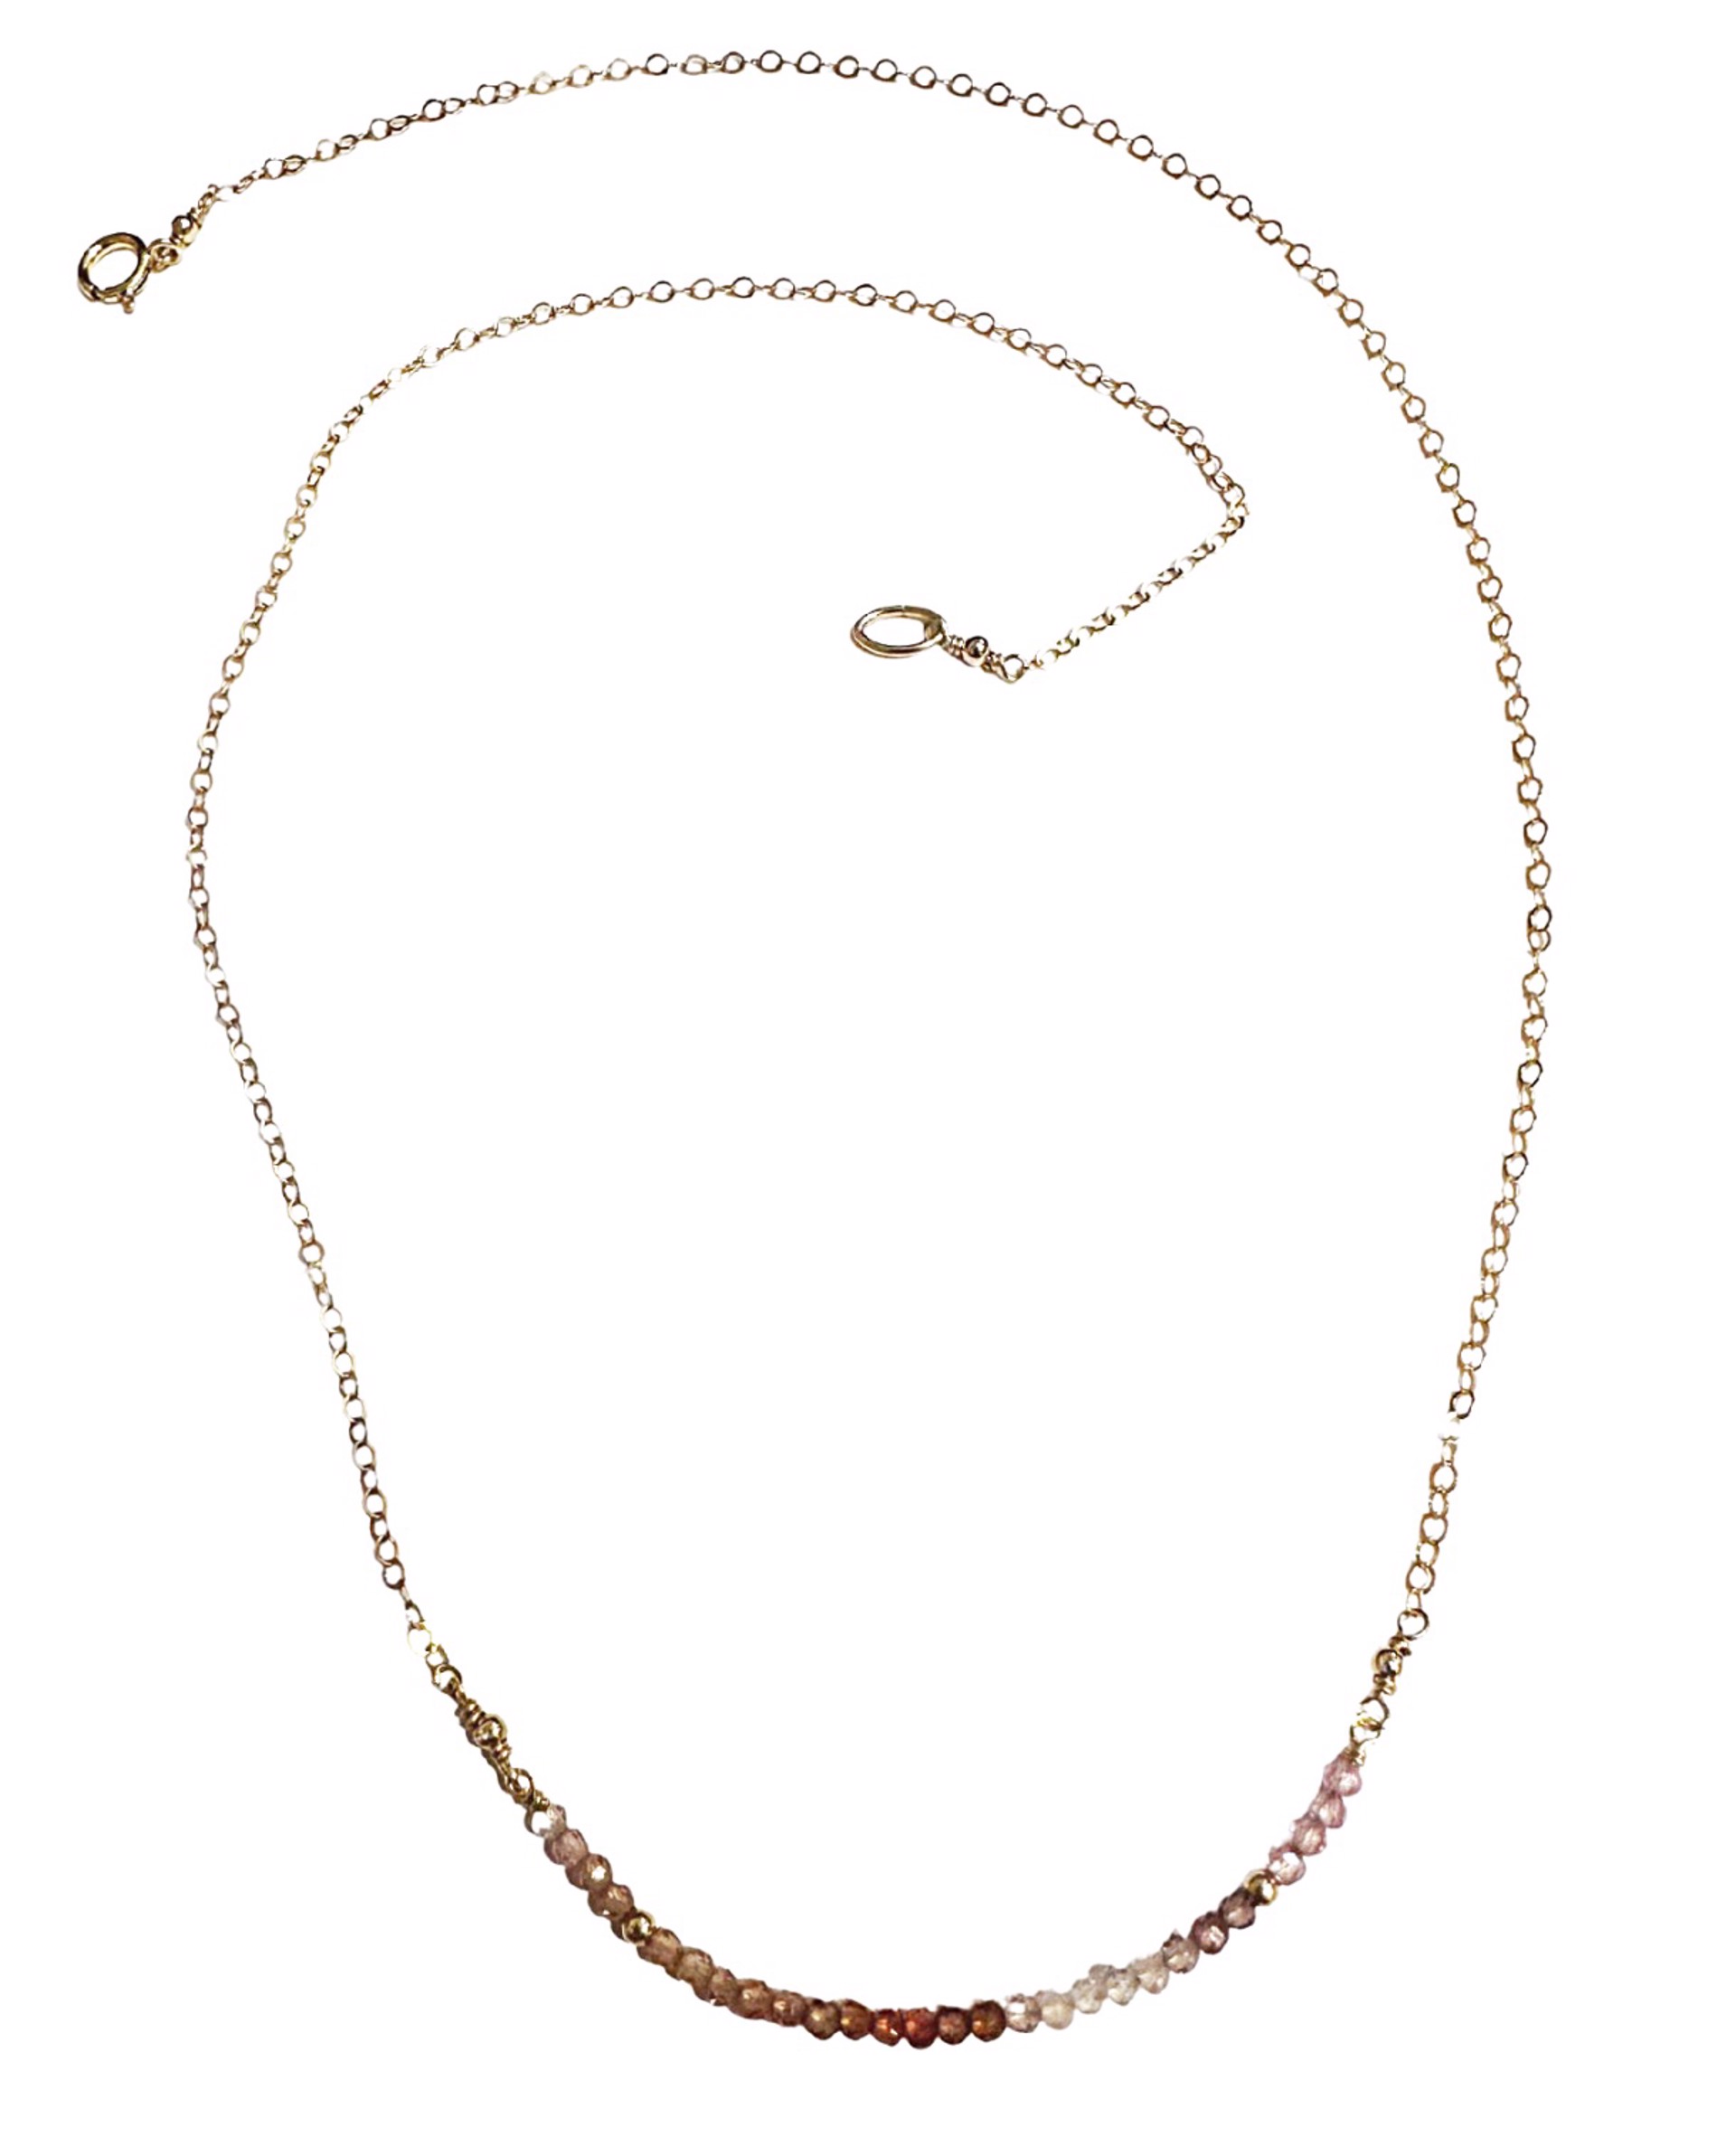 Necklace - Spinel with 14K Gold by Julia Balestracci